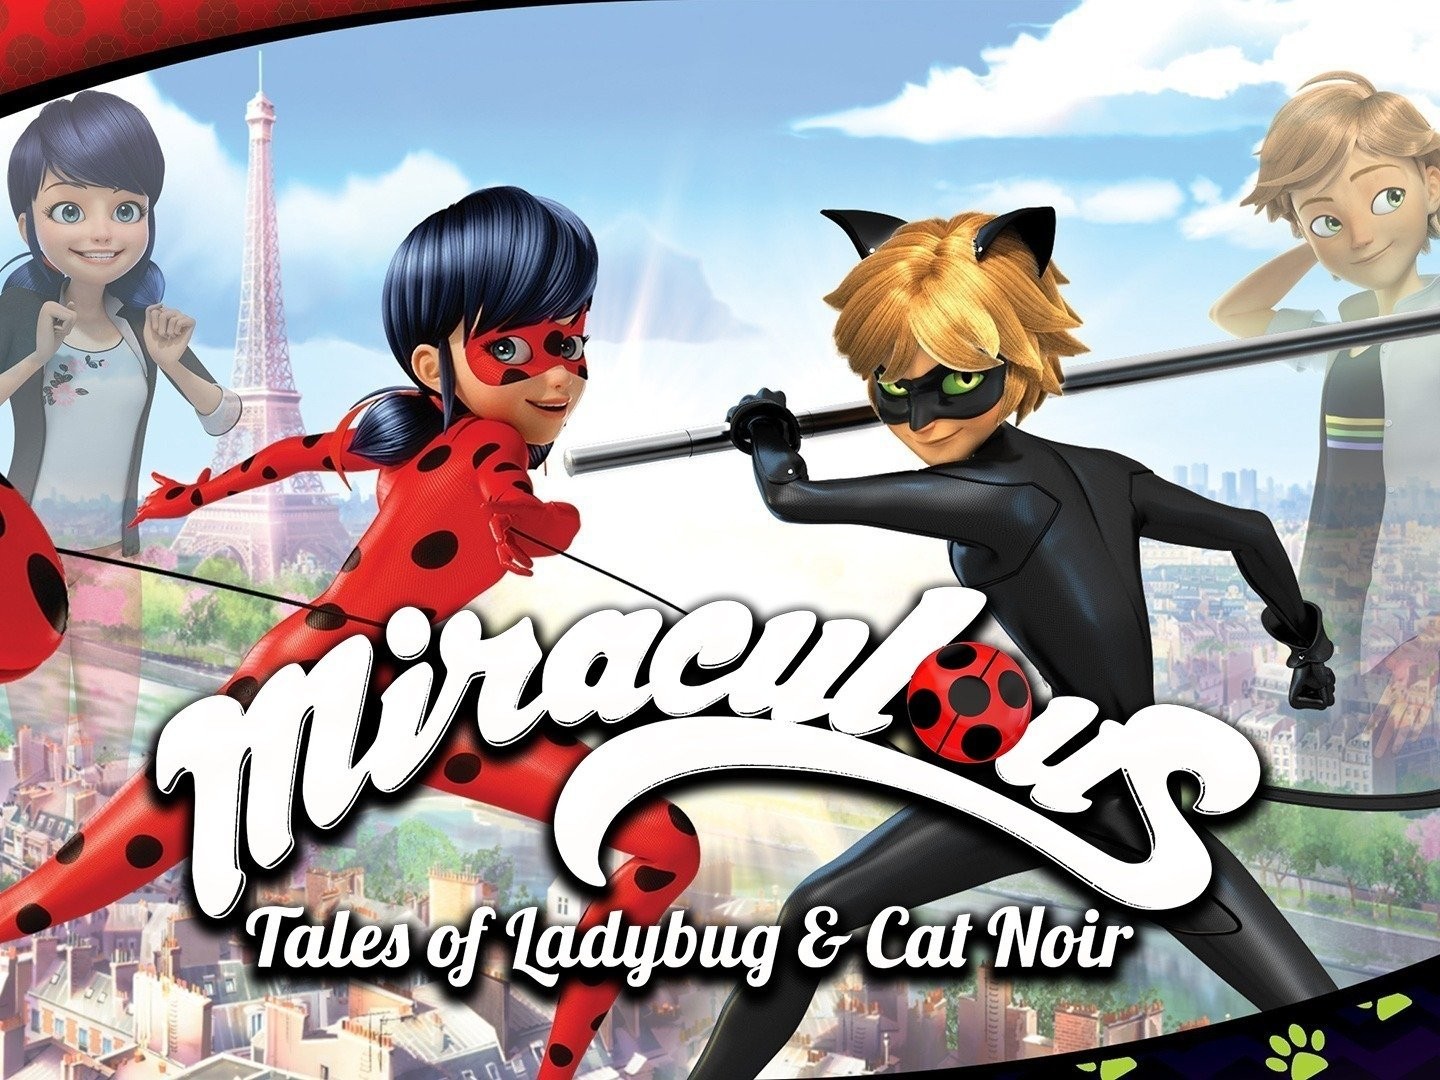 Disney Channel U.S. Premieres Epic Season Five of Global Hit Miraculous™ -  Tales of Ladybug and Cat Noir from ZAG and Method Animation (Mediawan Kids  & Family)